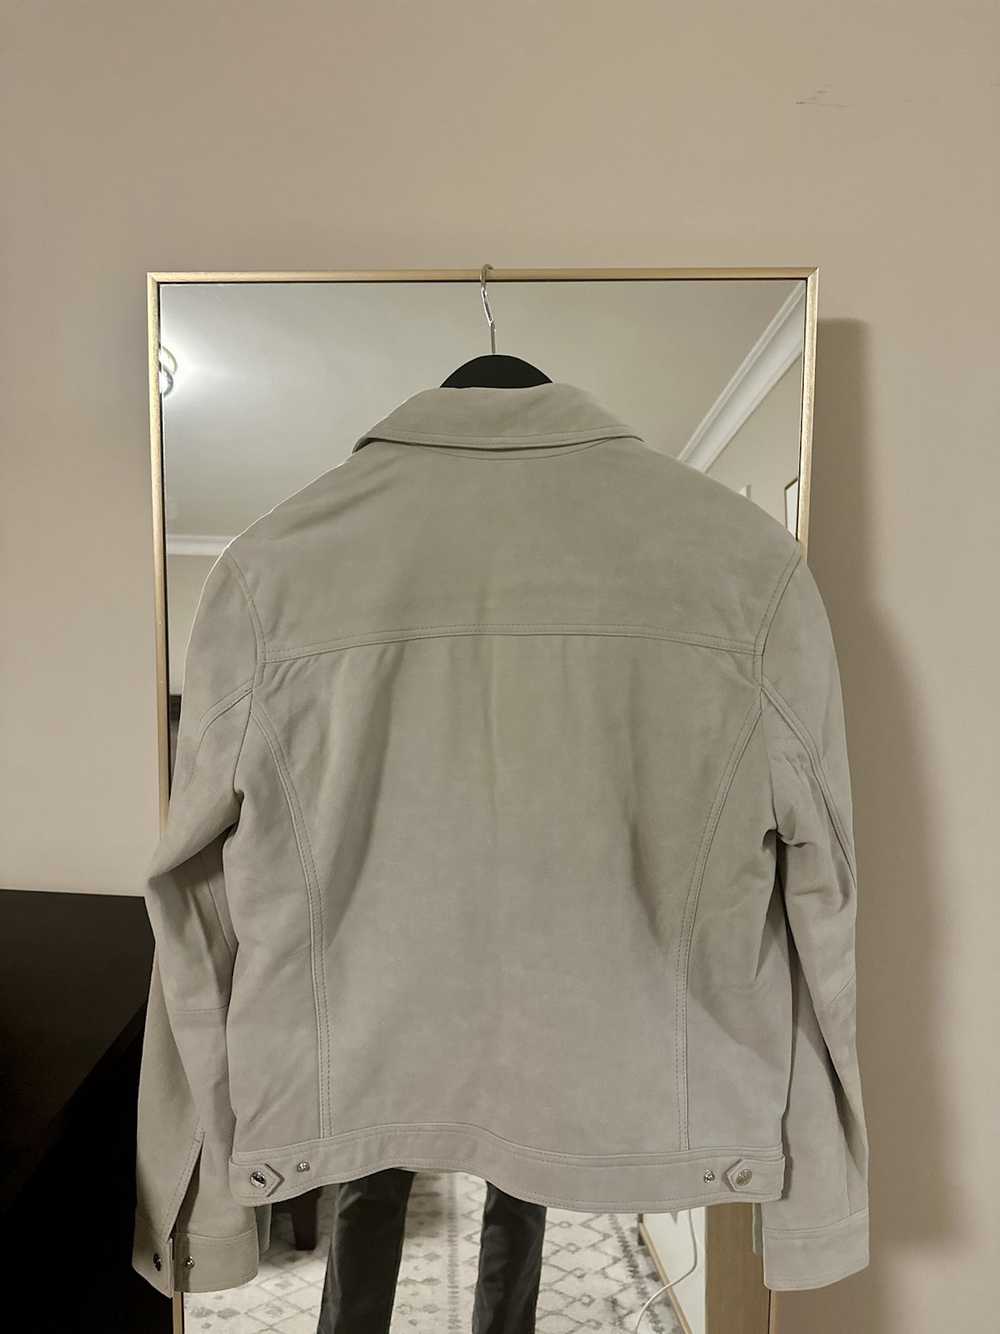 Reiss Reiss Suede Jacket - Mint condition - image 2